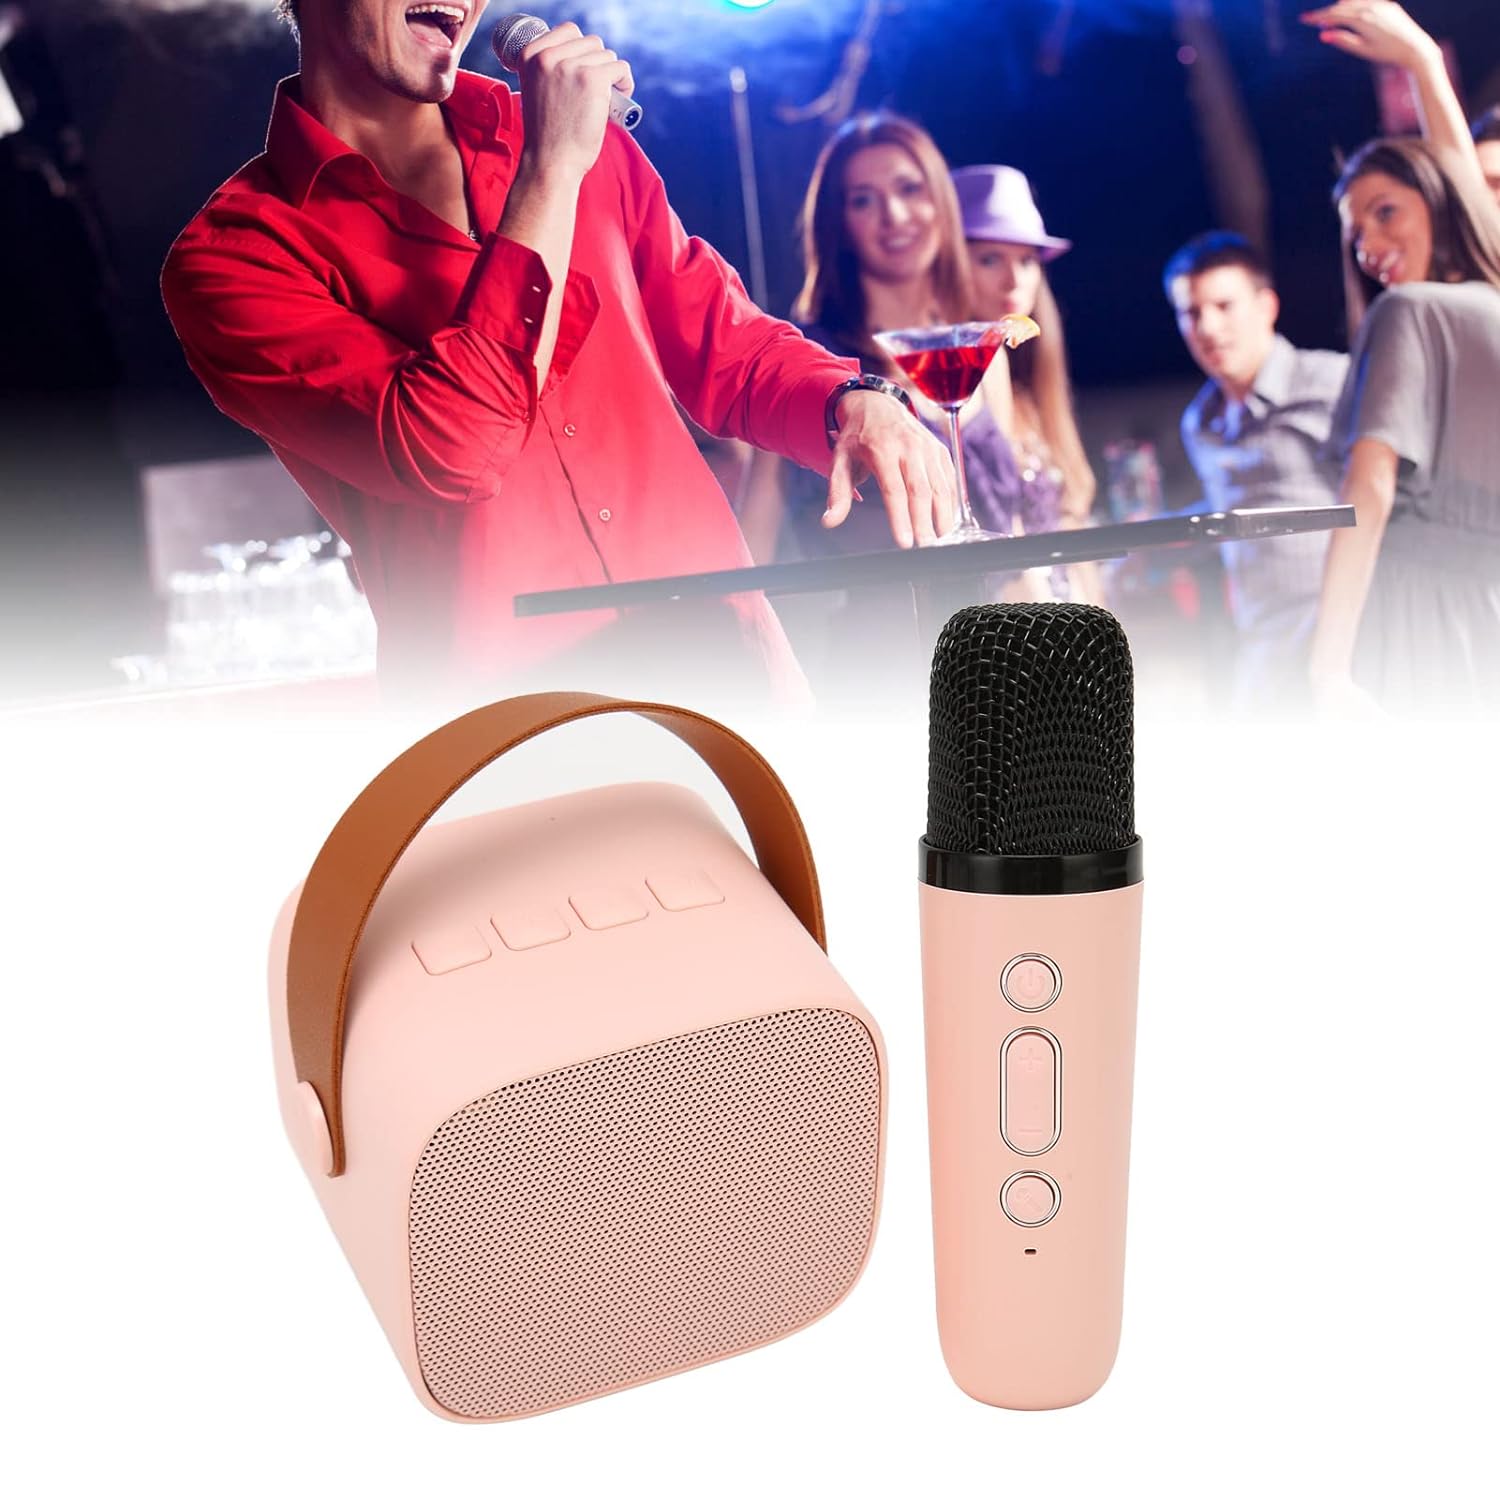 Mini Karaoke Machine with Wireless Microphones for Kids Adults, HD Stereo Rechargeable Retro Portable Bluetooth Speaker Gift for Girls Boys Toys ()